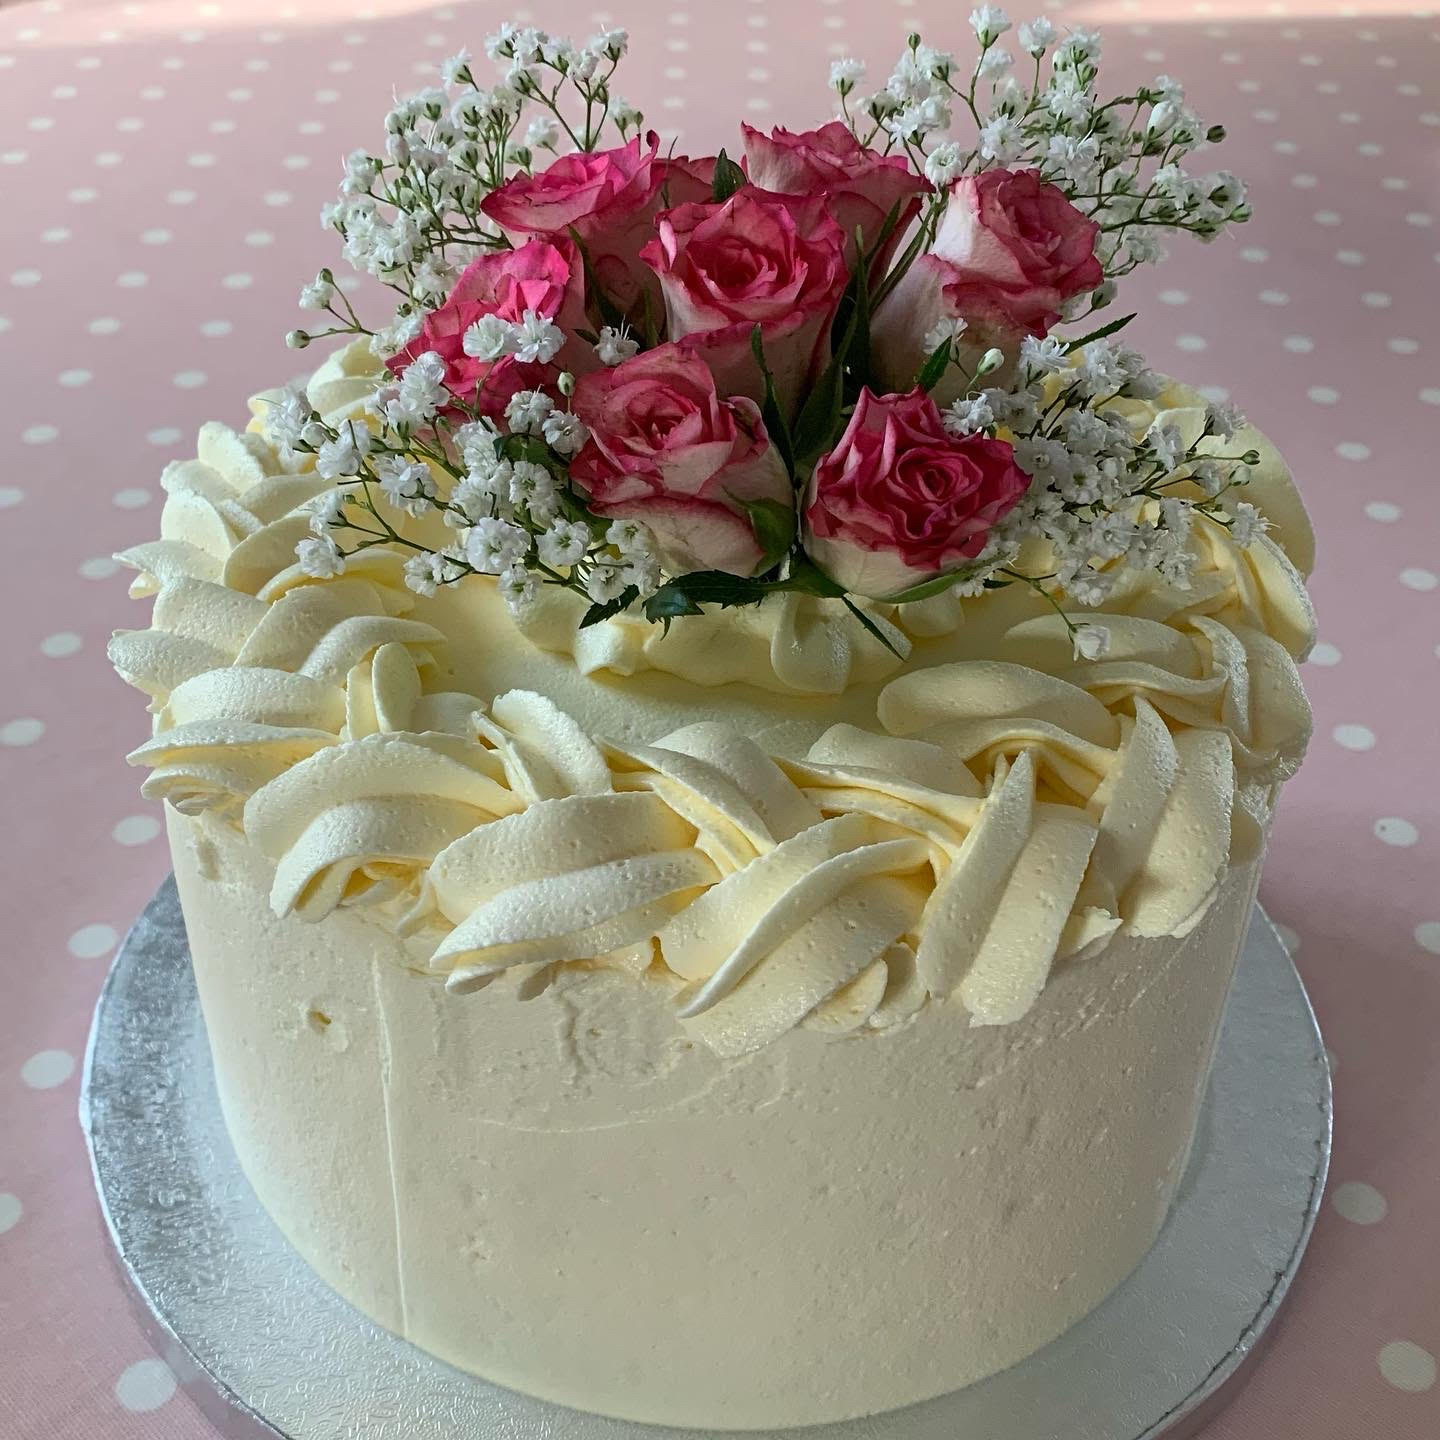 Cake with creamy frosting and pink roses